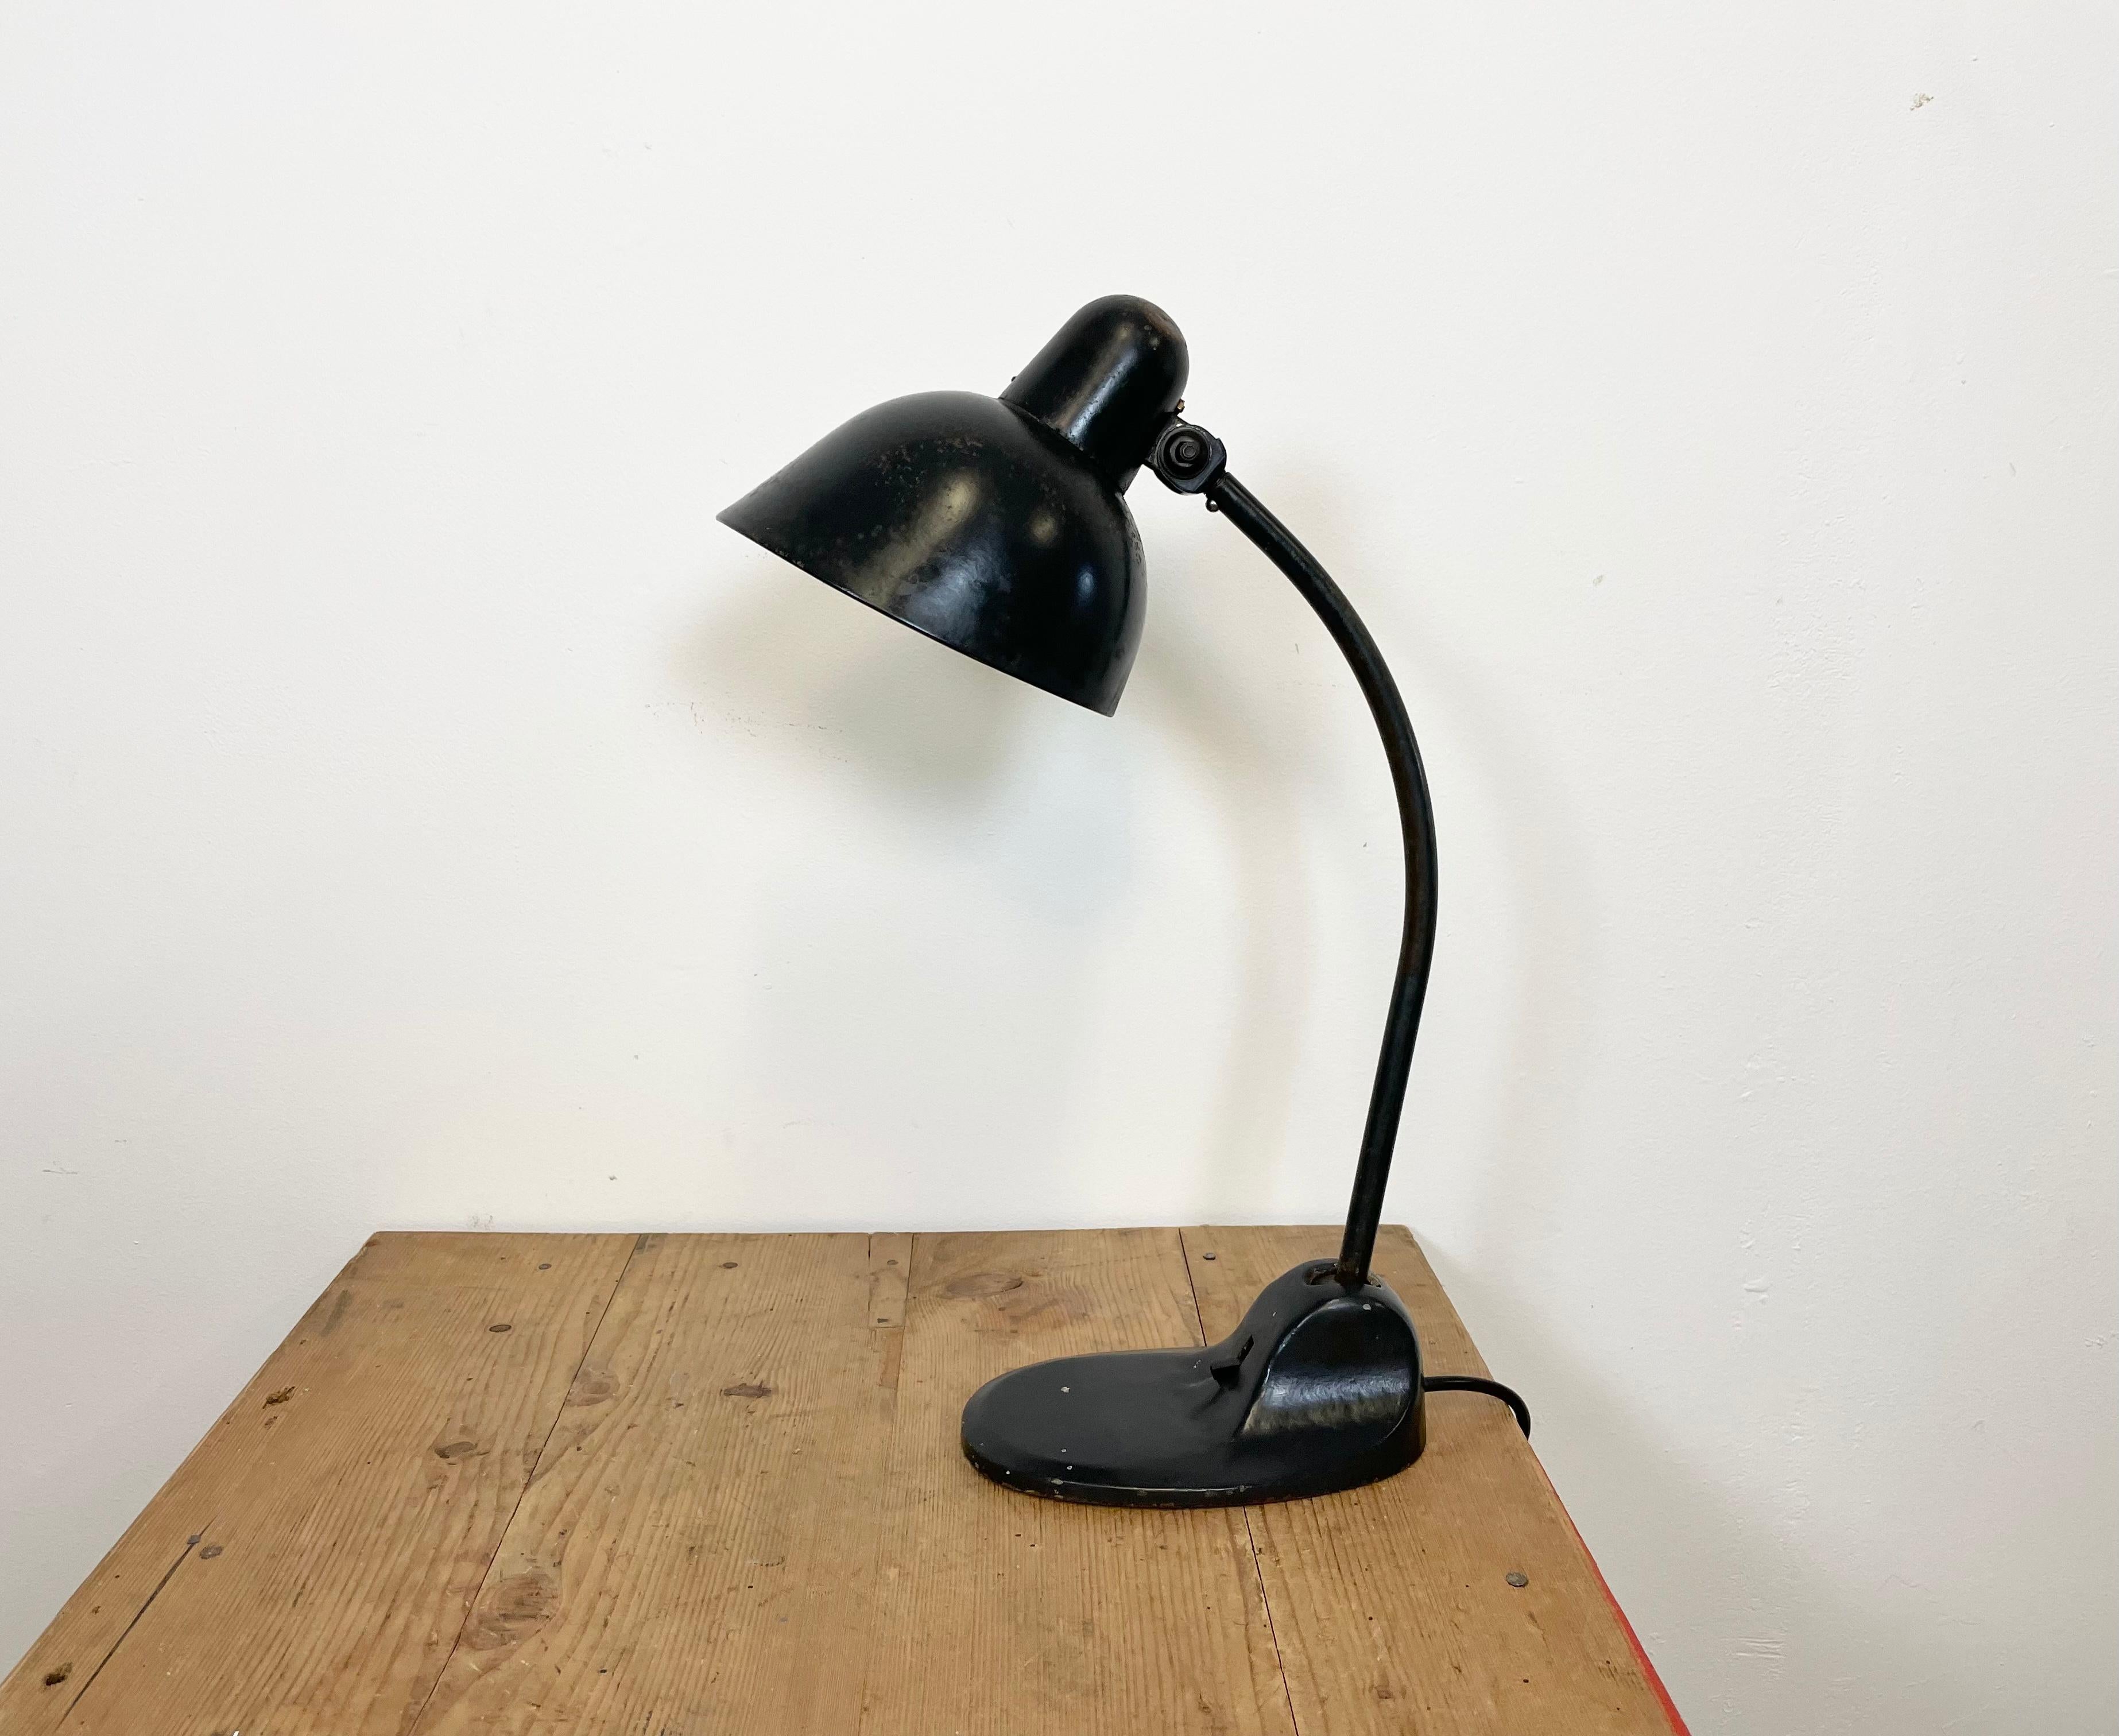 Black industrial table lamp made by Siemens during the 1930s.It features a black metal shade, a black iron base with original switch and arm with two adjustable joints. Original socket requires E 27 lightbulbs. Fully functional.